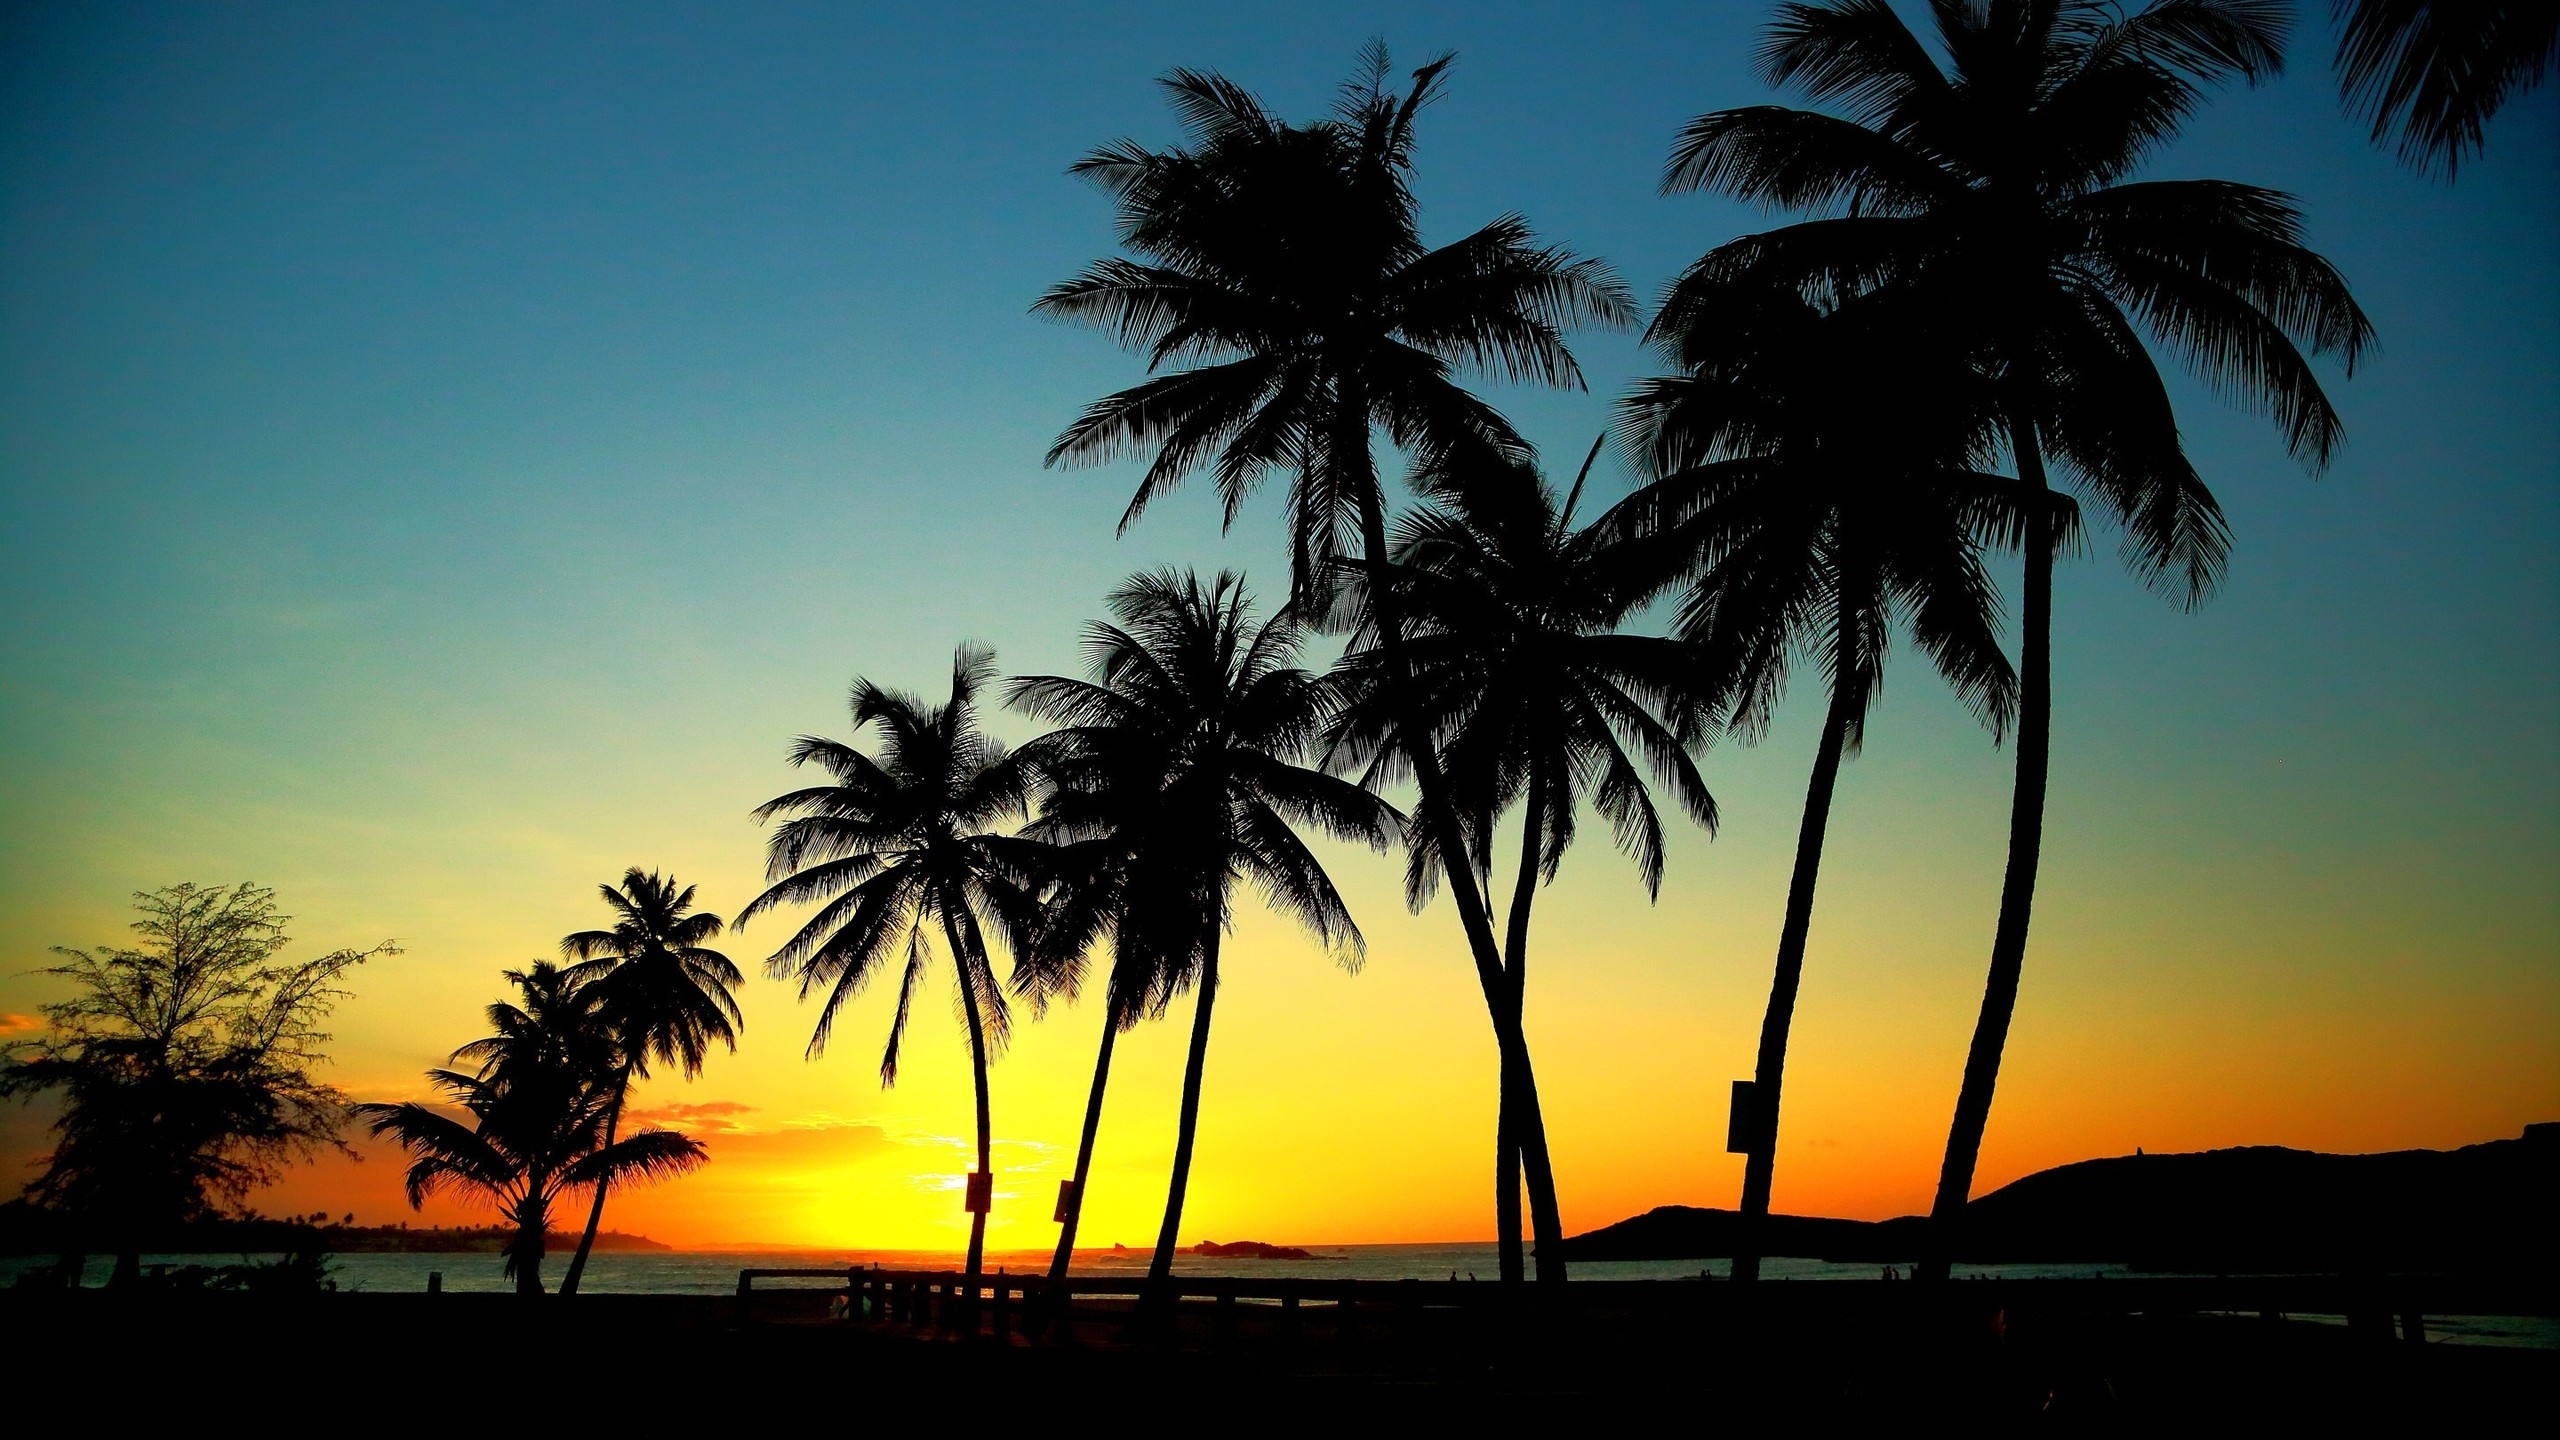 Palm Trees in Sunset for 2560x1440 HDTV resolution